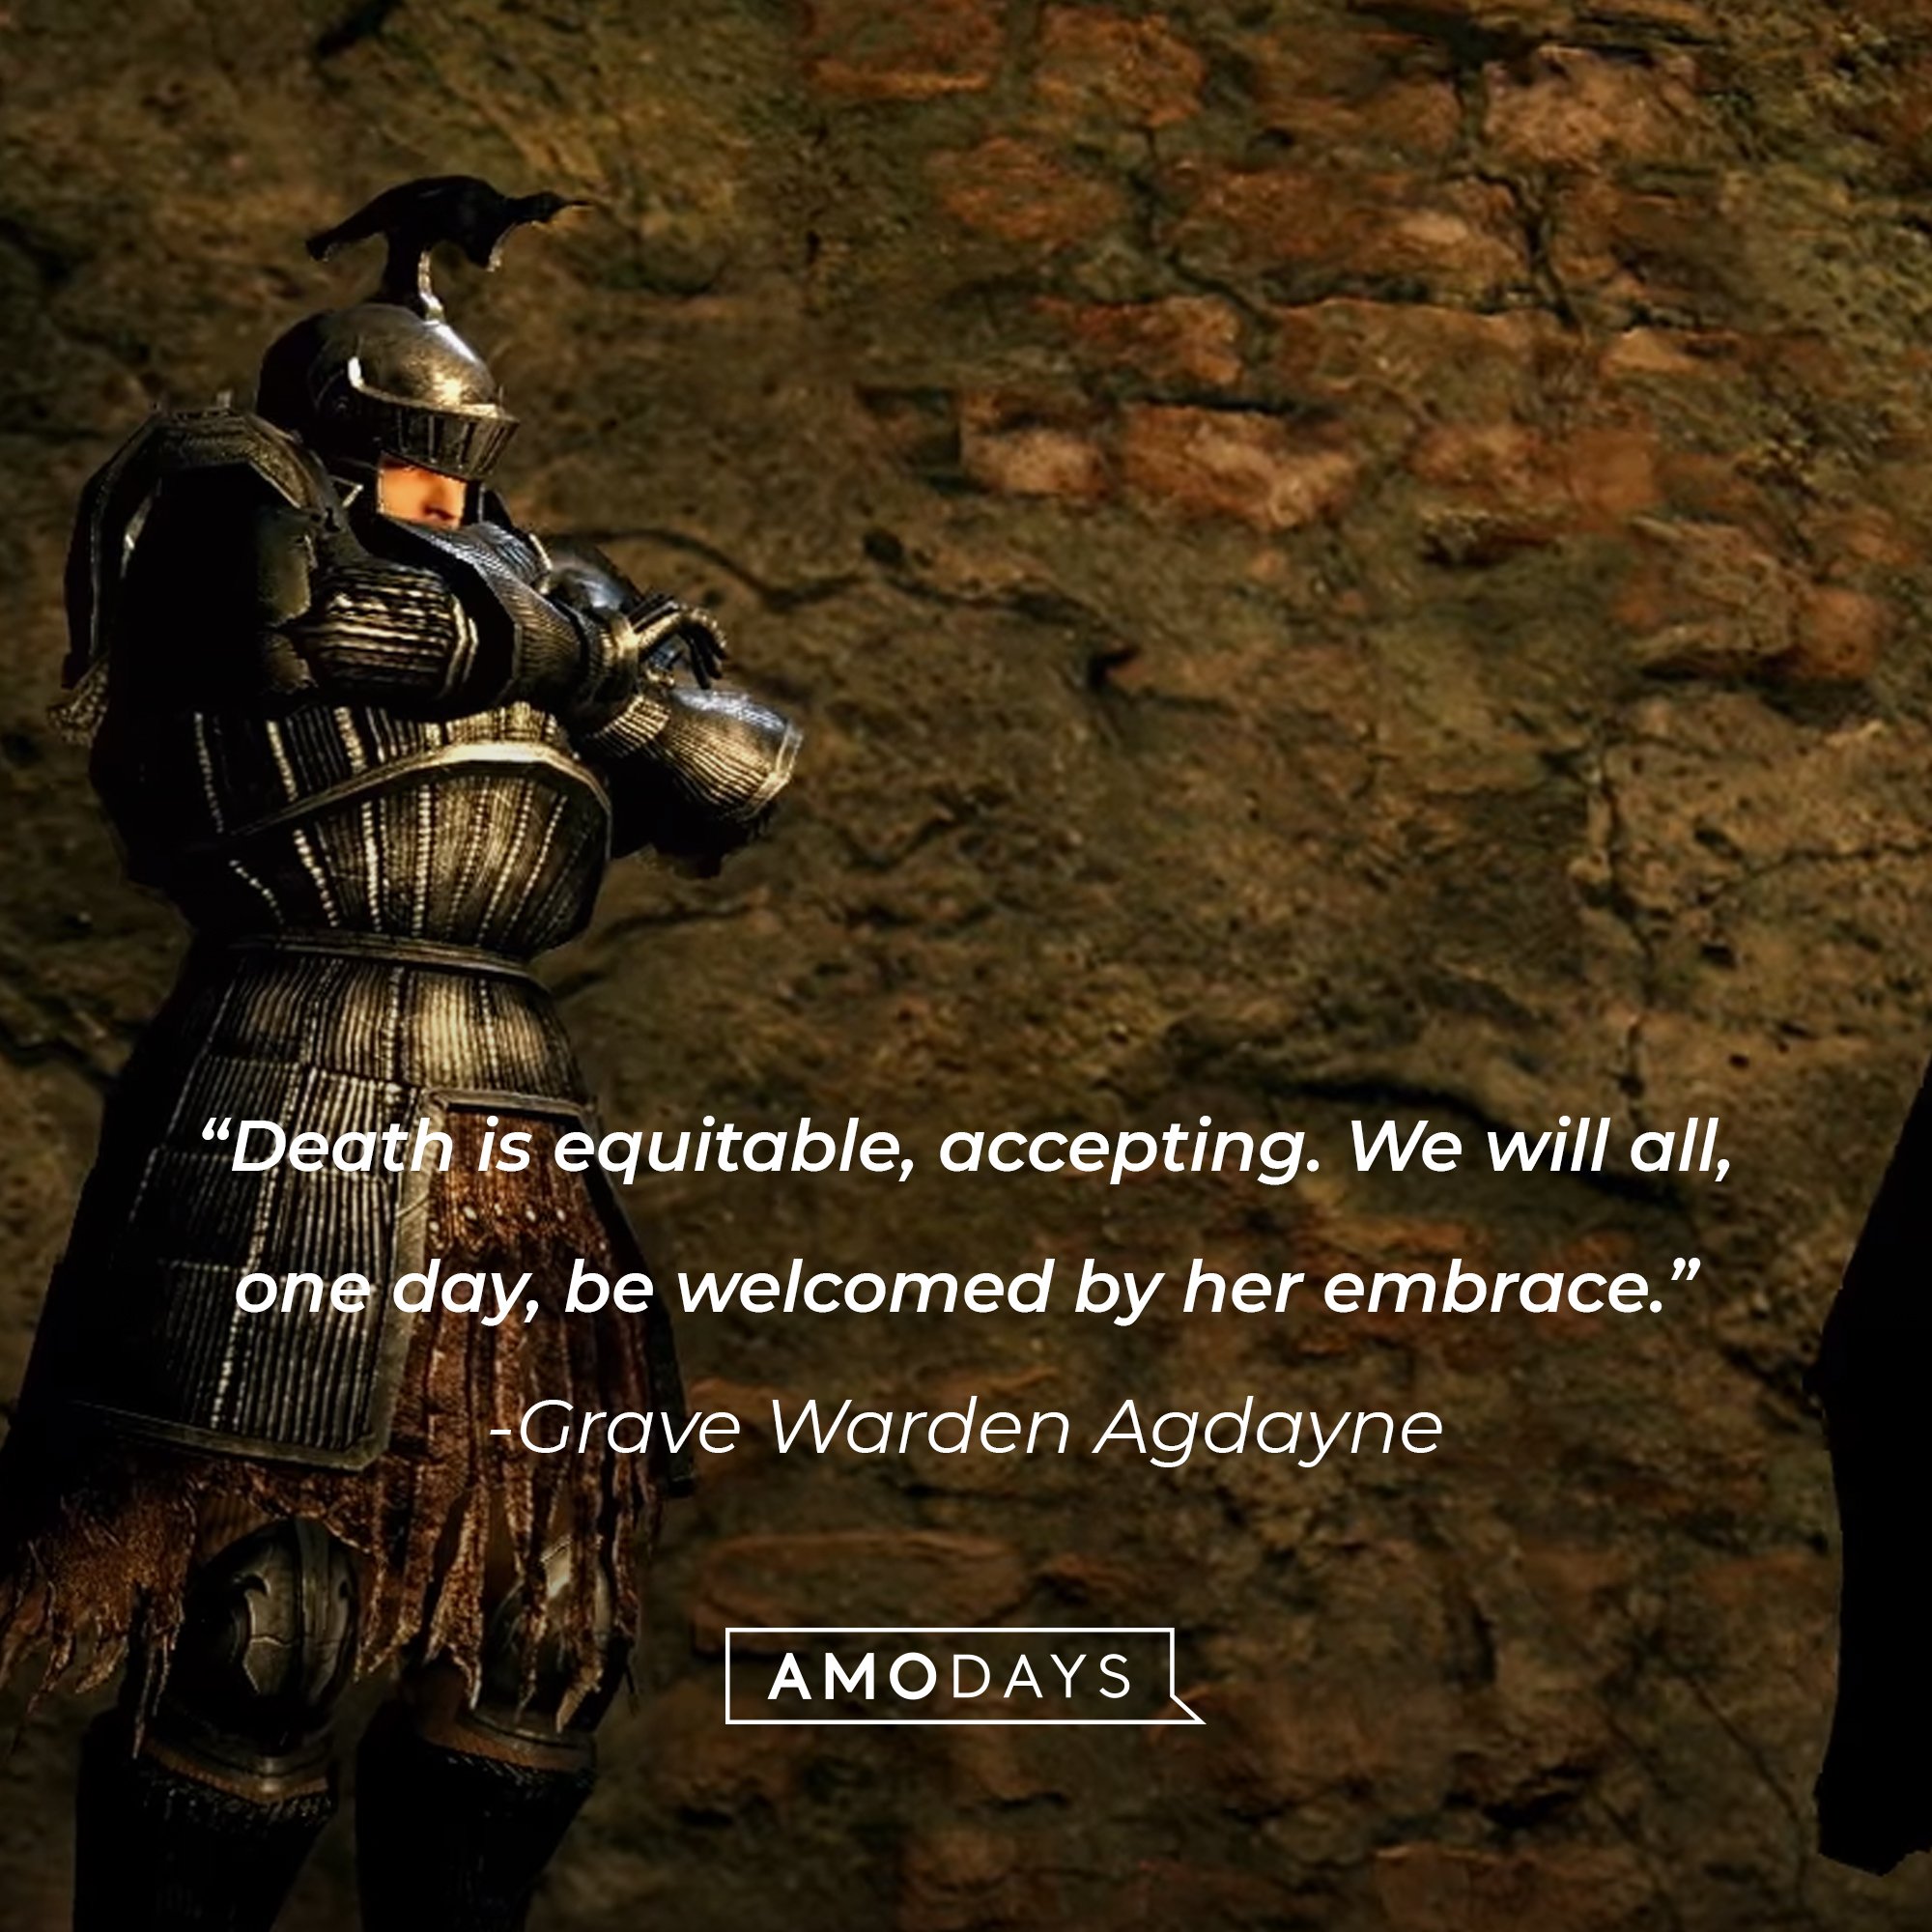 Graove Warden Agdayne’s quote: "Death is equitable, accepting. We will all, one day, be welcomed by her embrace." | Image: AmoDays